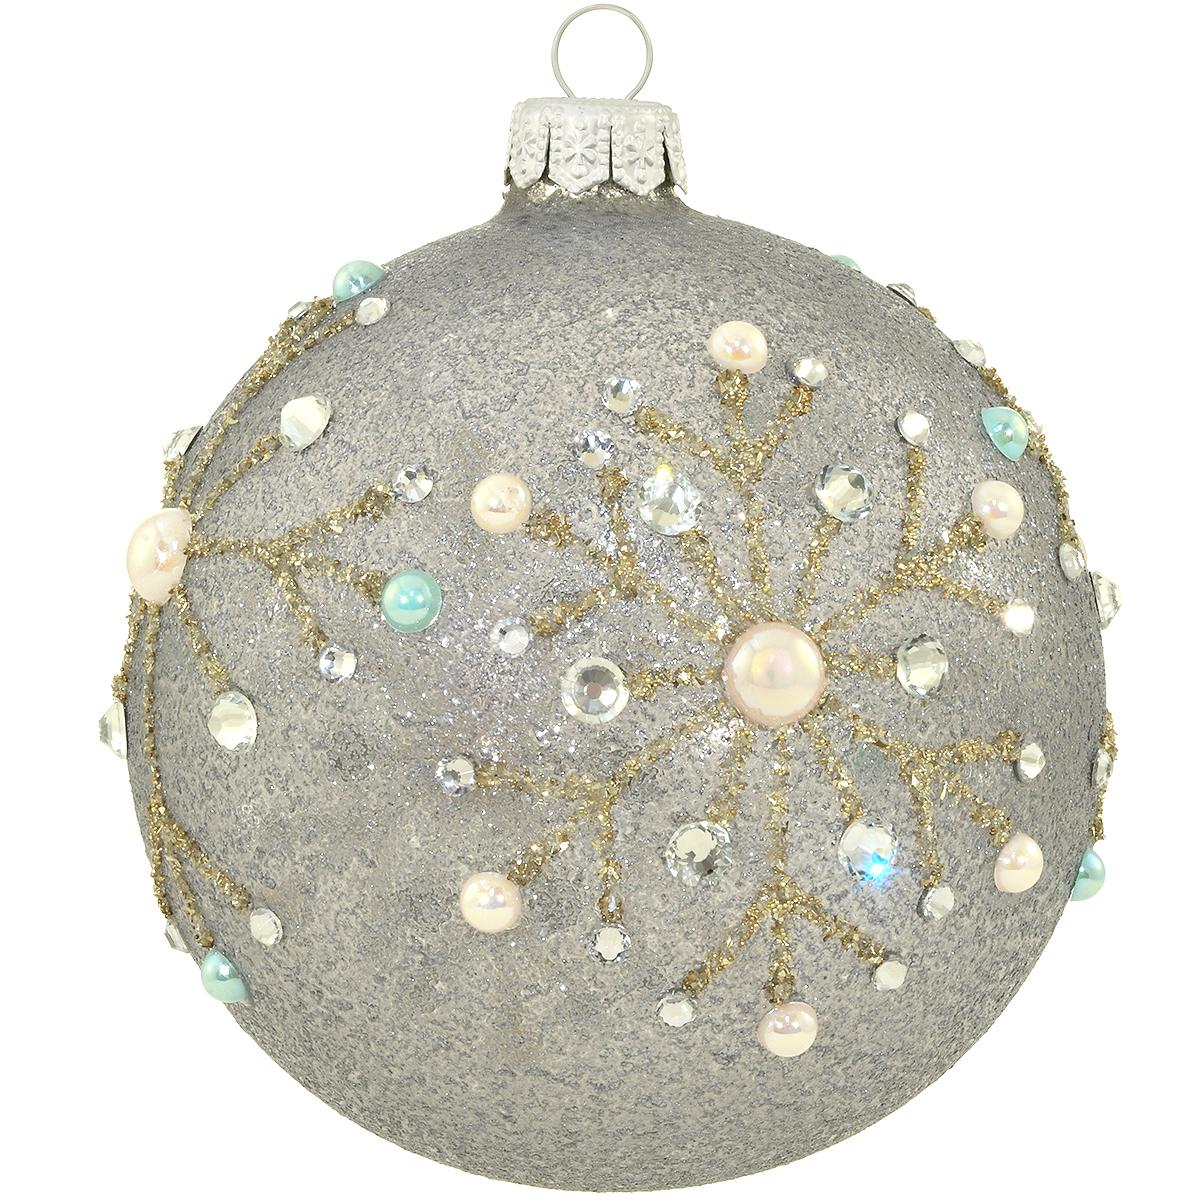 Snowflakes On Ball 4 Inch Ornament